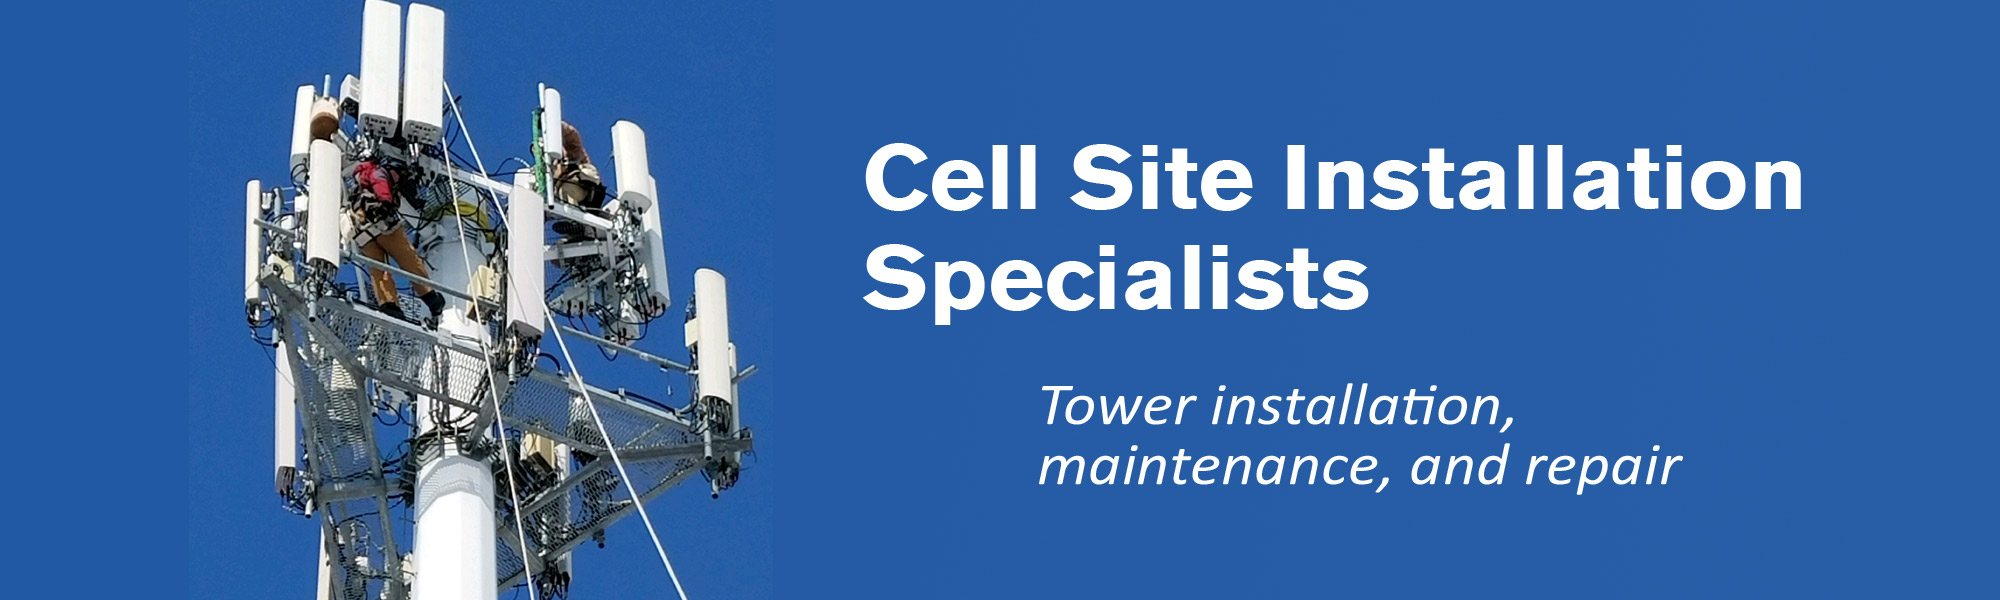 CEll Tower antenna and radio services